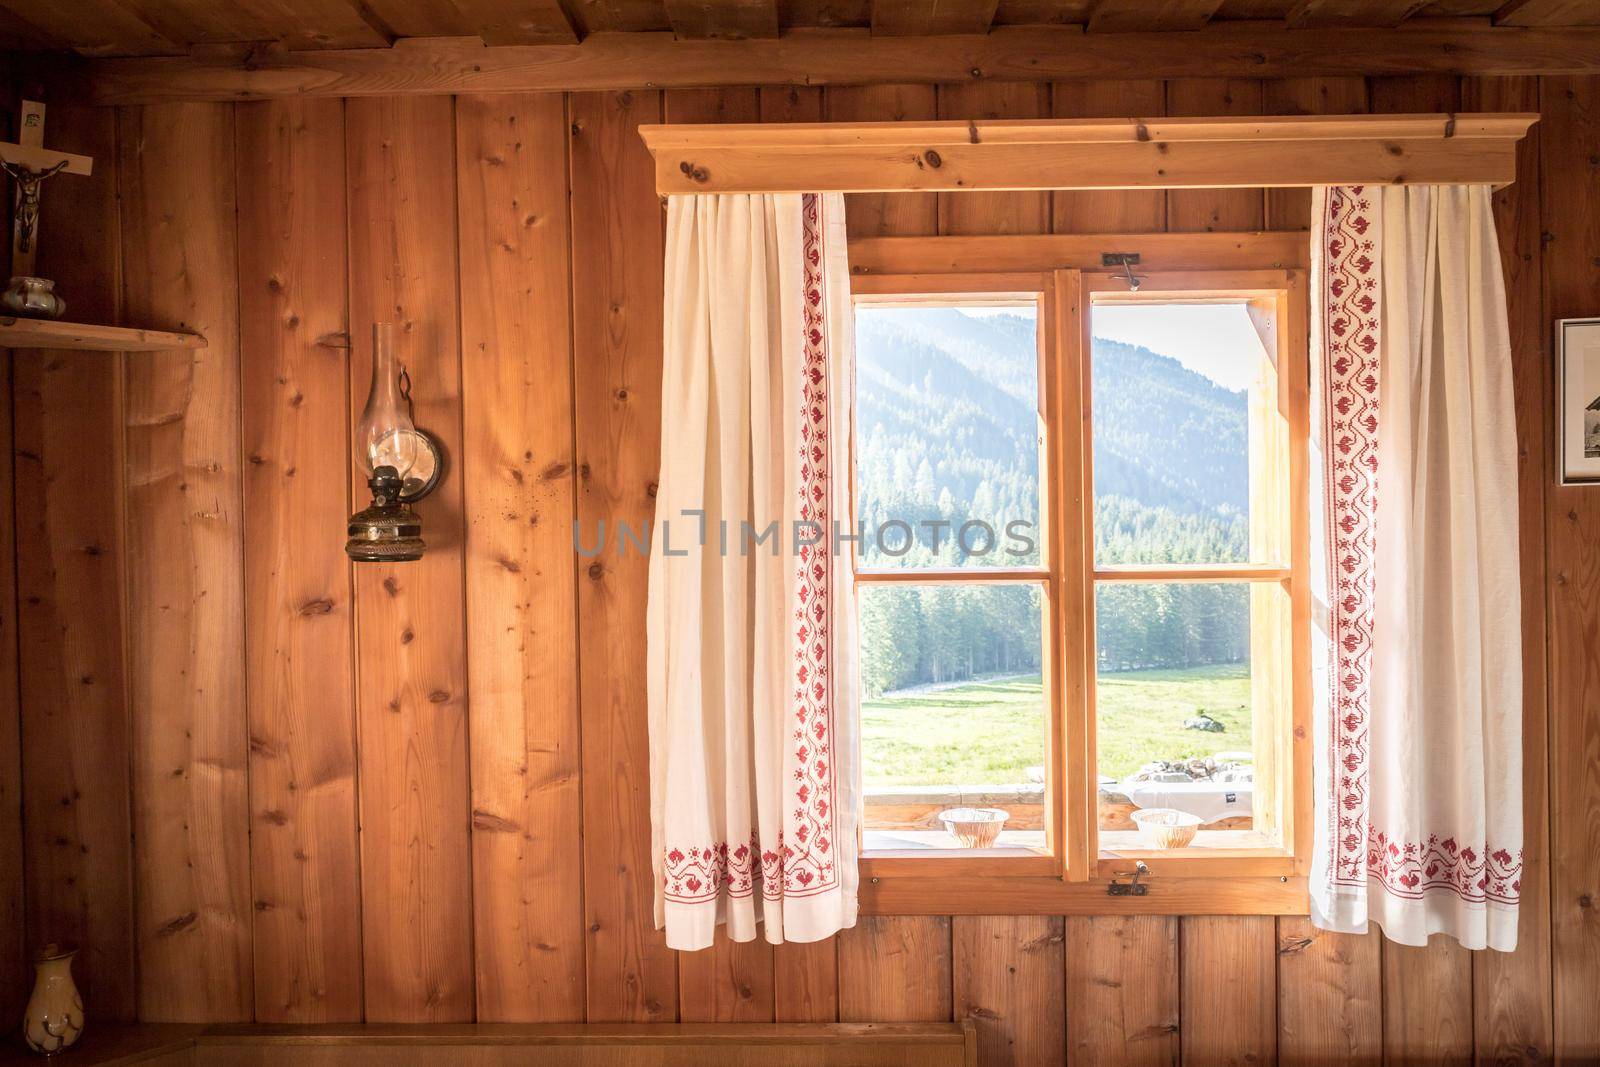 Holiday in the mountains: Rustic old wooden interior of a cabin or hut by Daxenbichler